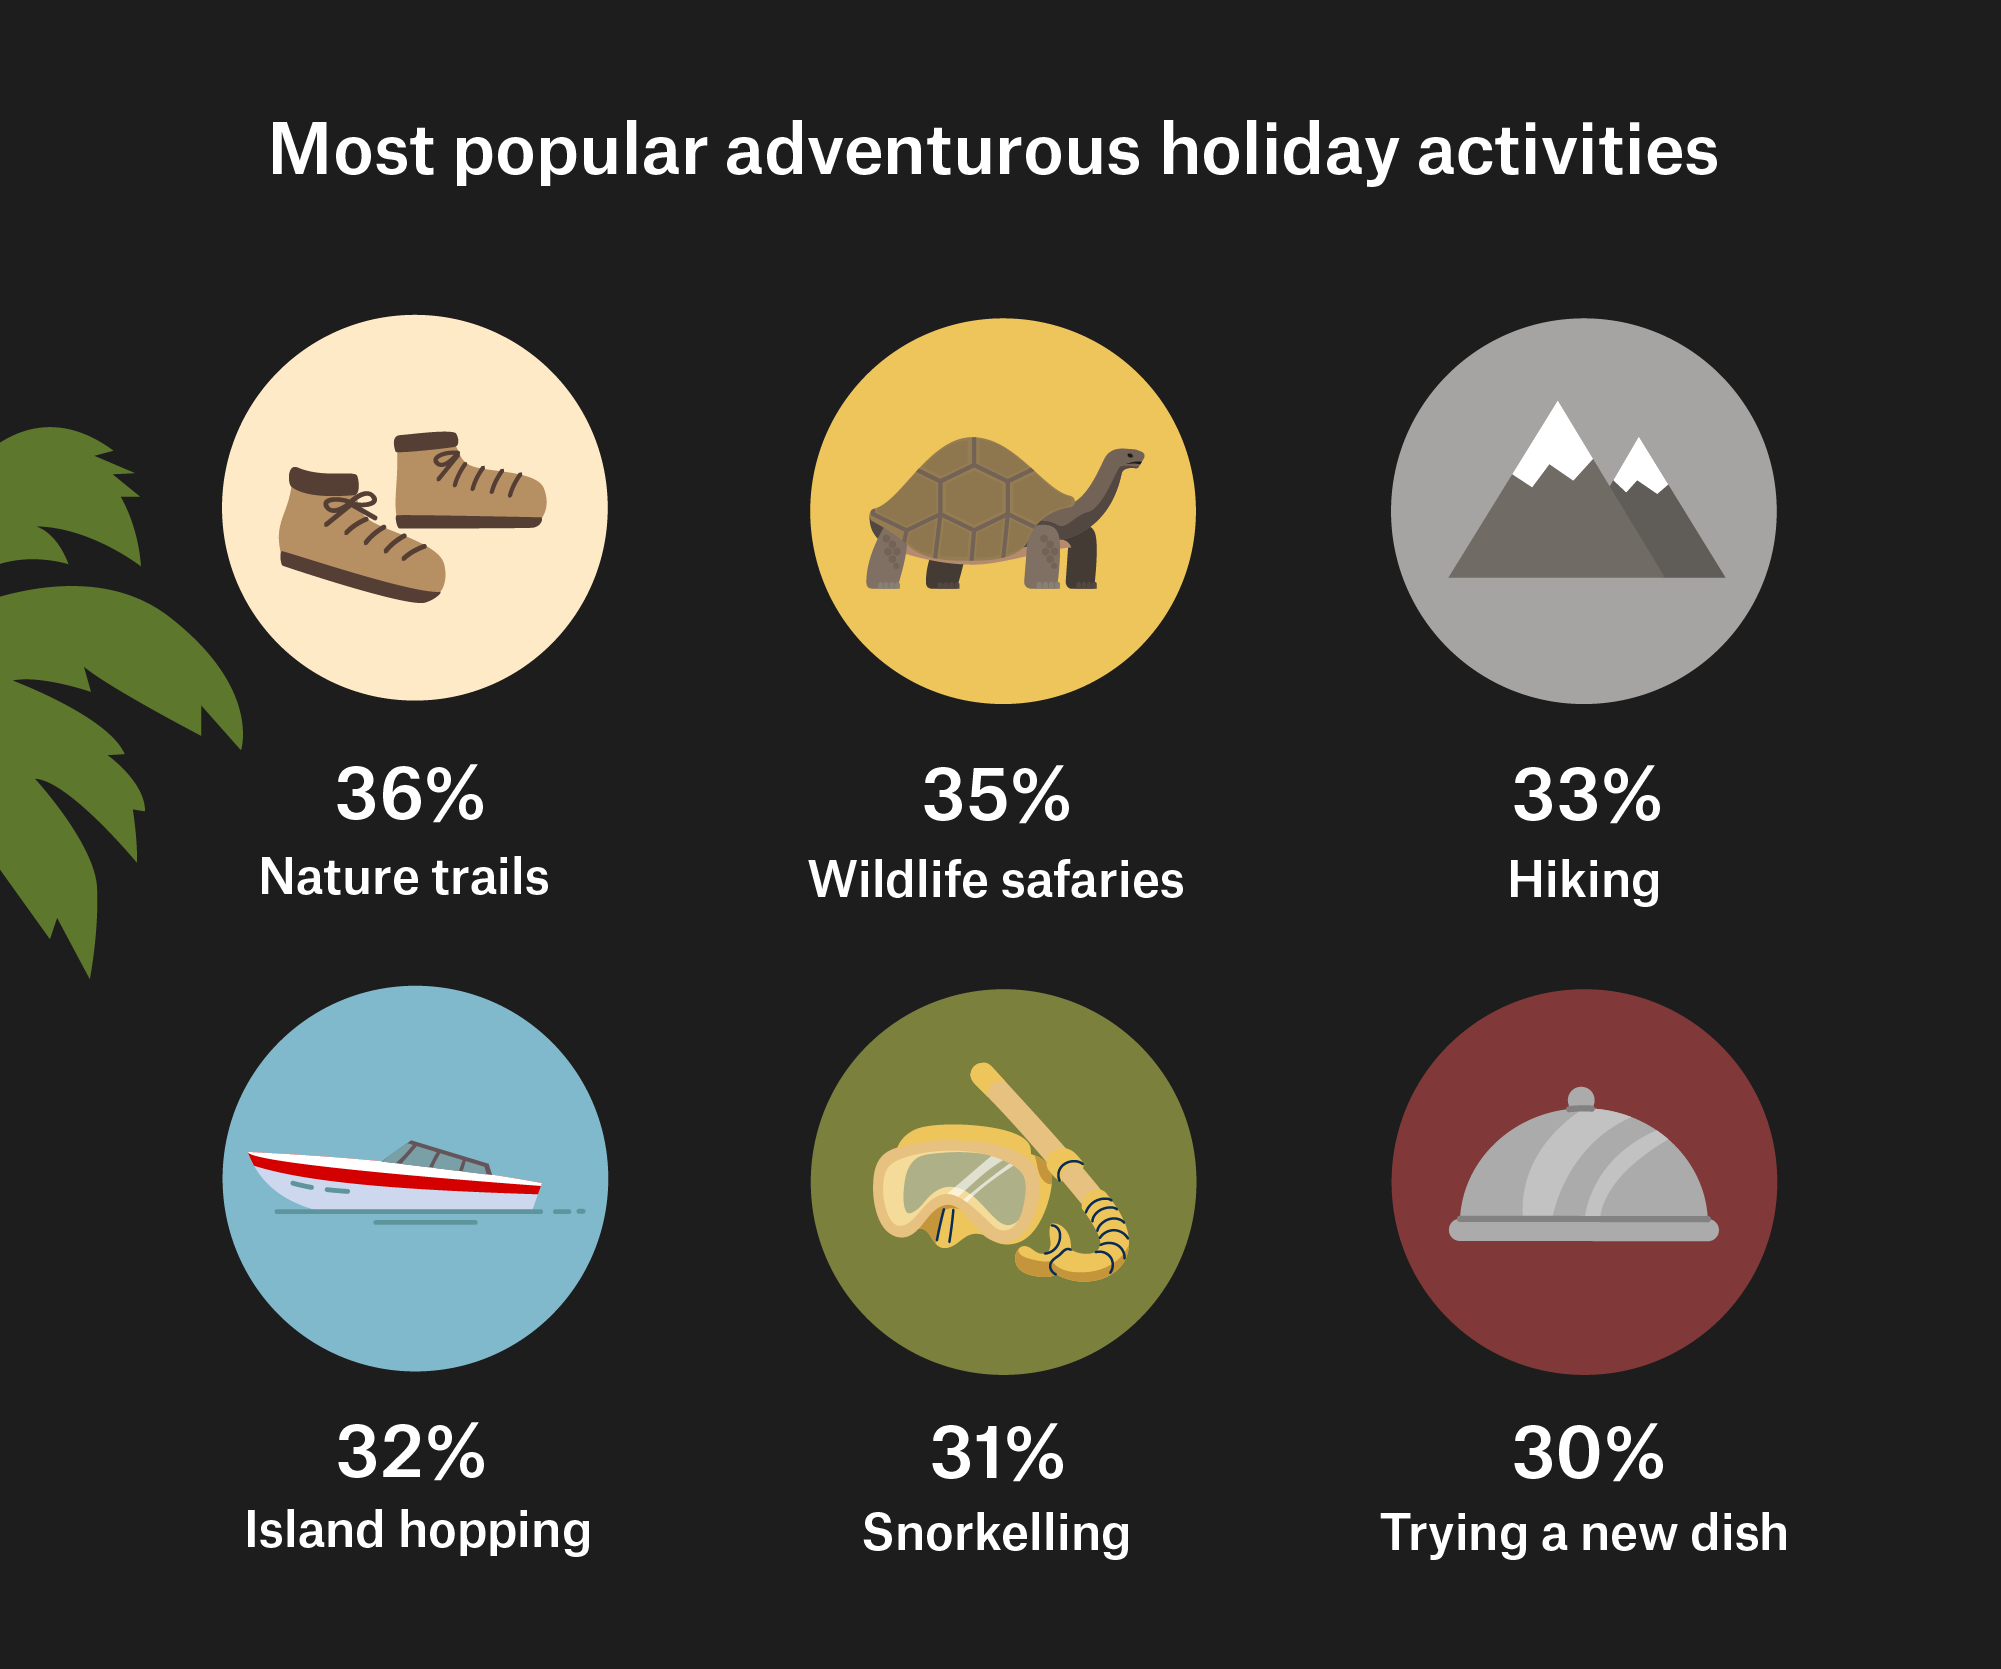 Snowboarding (21 per cent), cliff diving (19 per cent,) and wildlife watching (18 per cent) were other activities popular for those looking for upcoming adventures